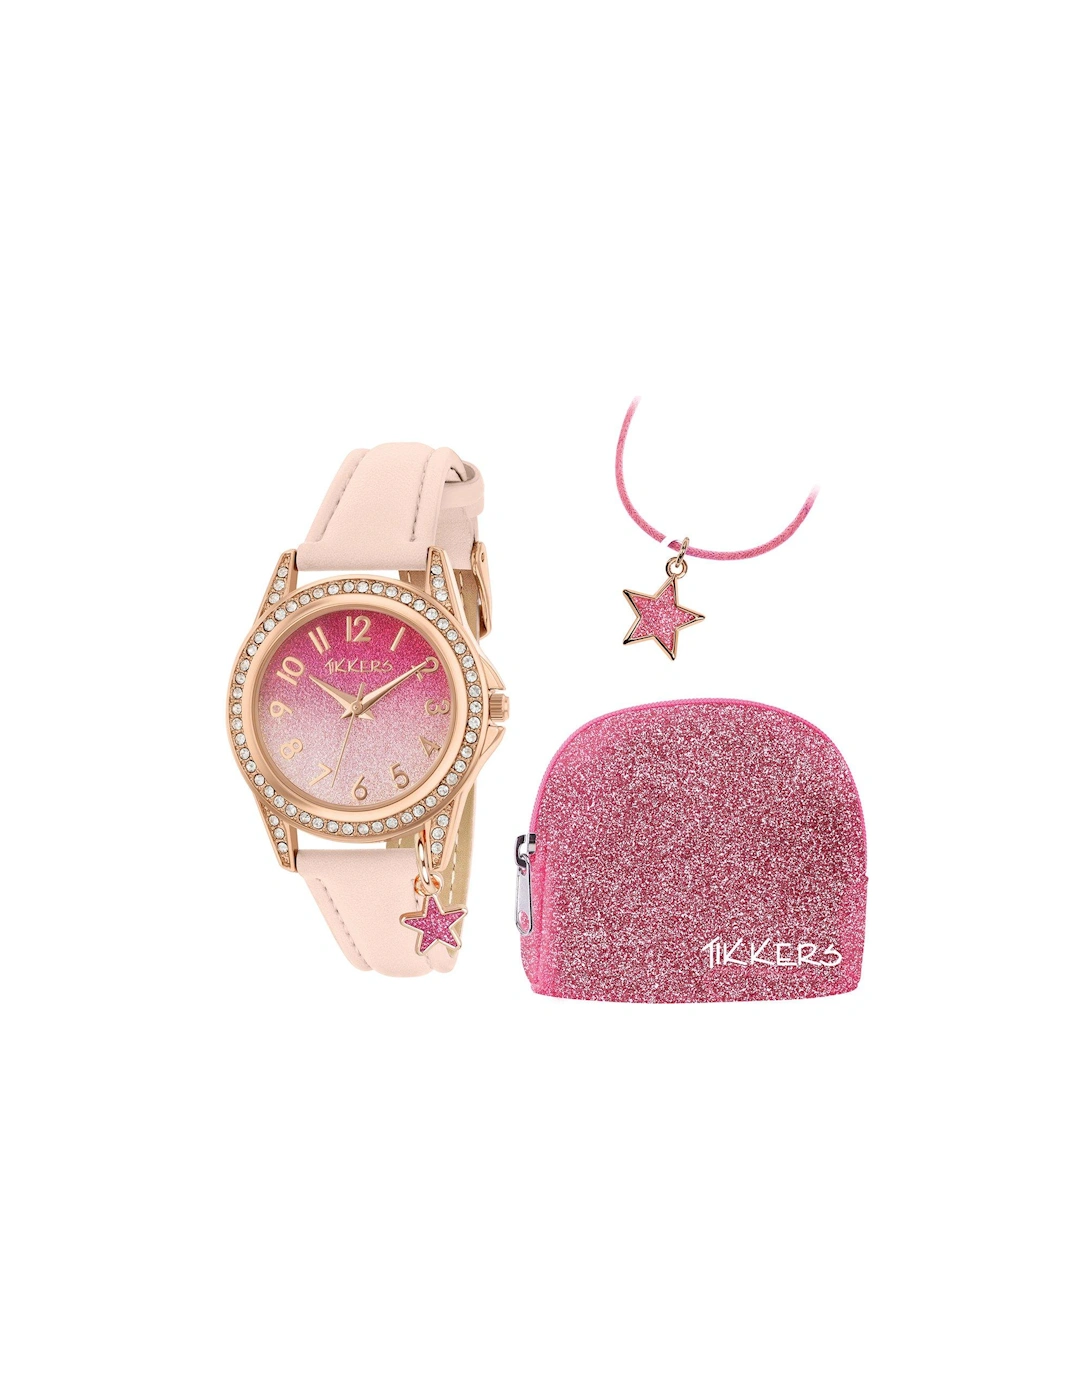 Pink Glitter Dial Pink Leather Strap Watch with Purse and Necklace Kids Gift Set, 2 of 1